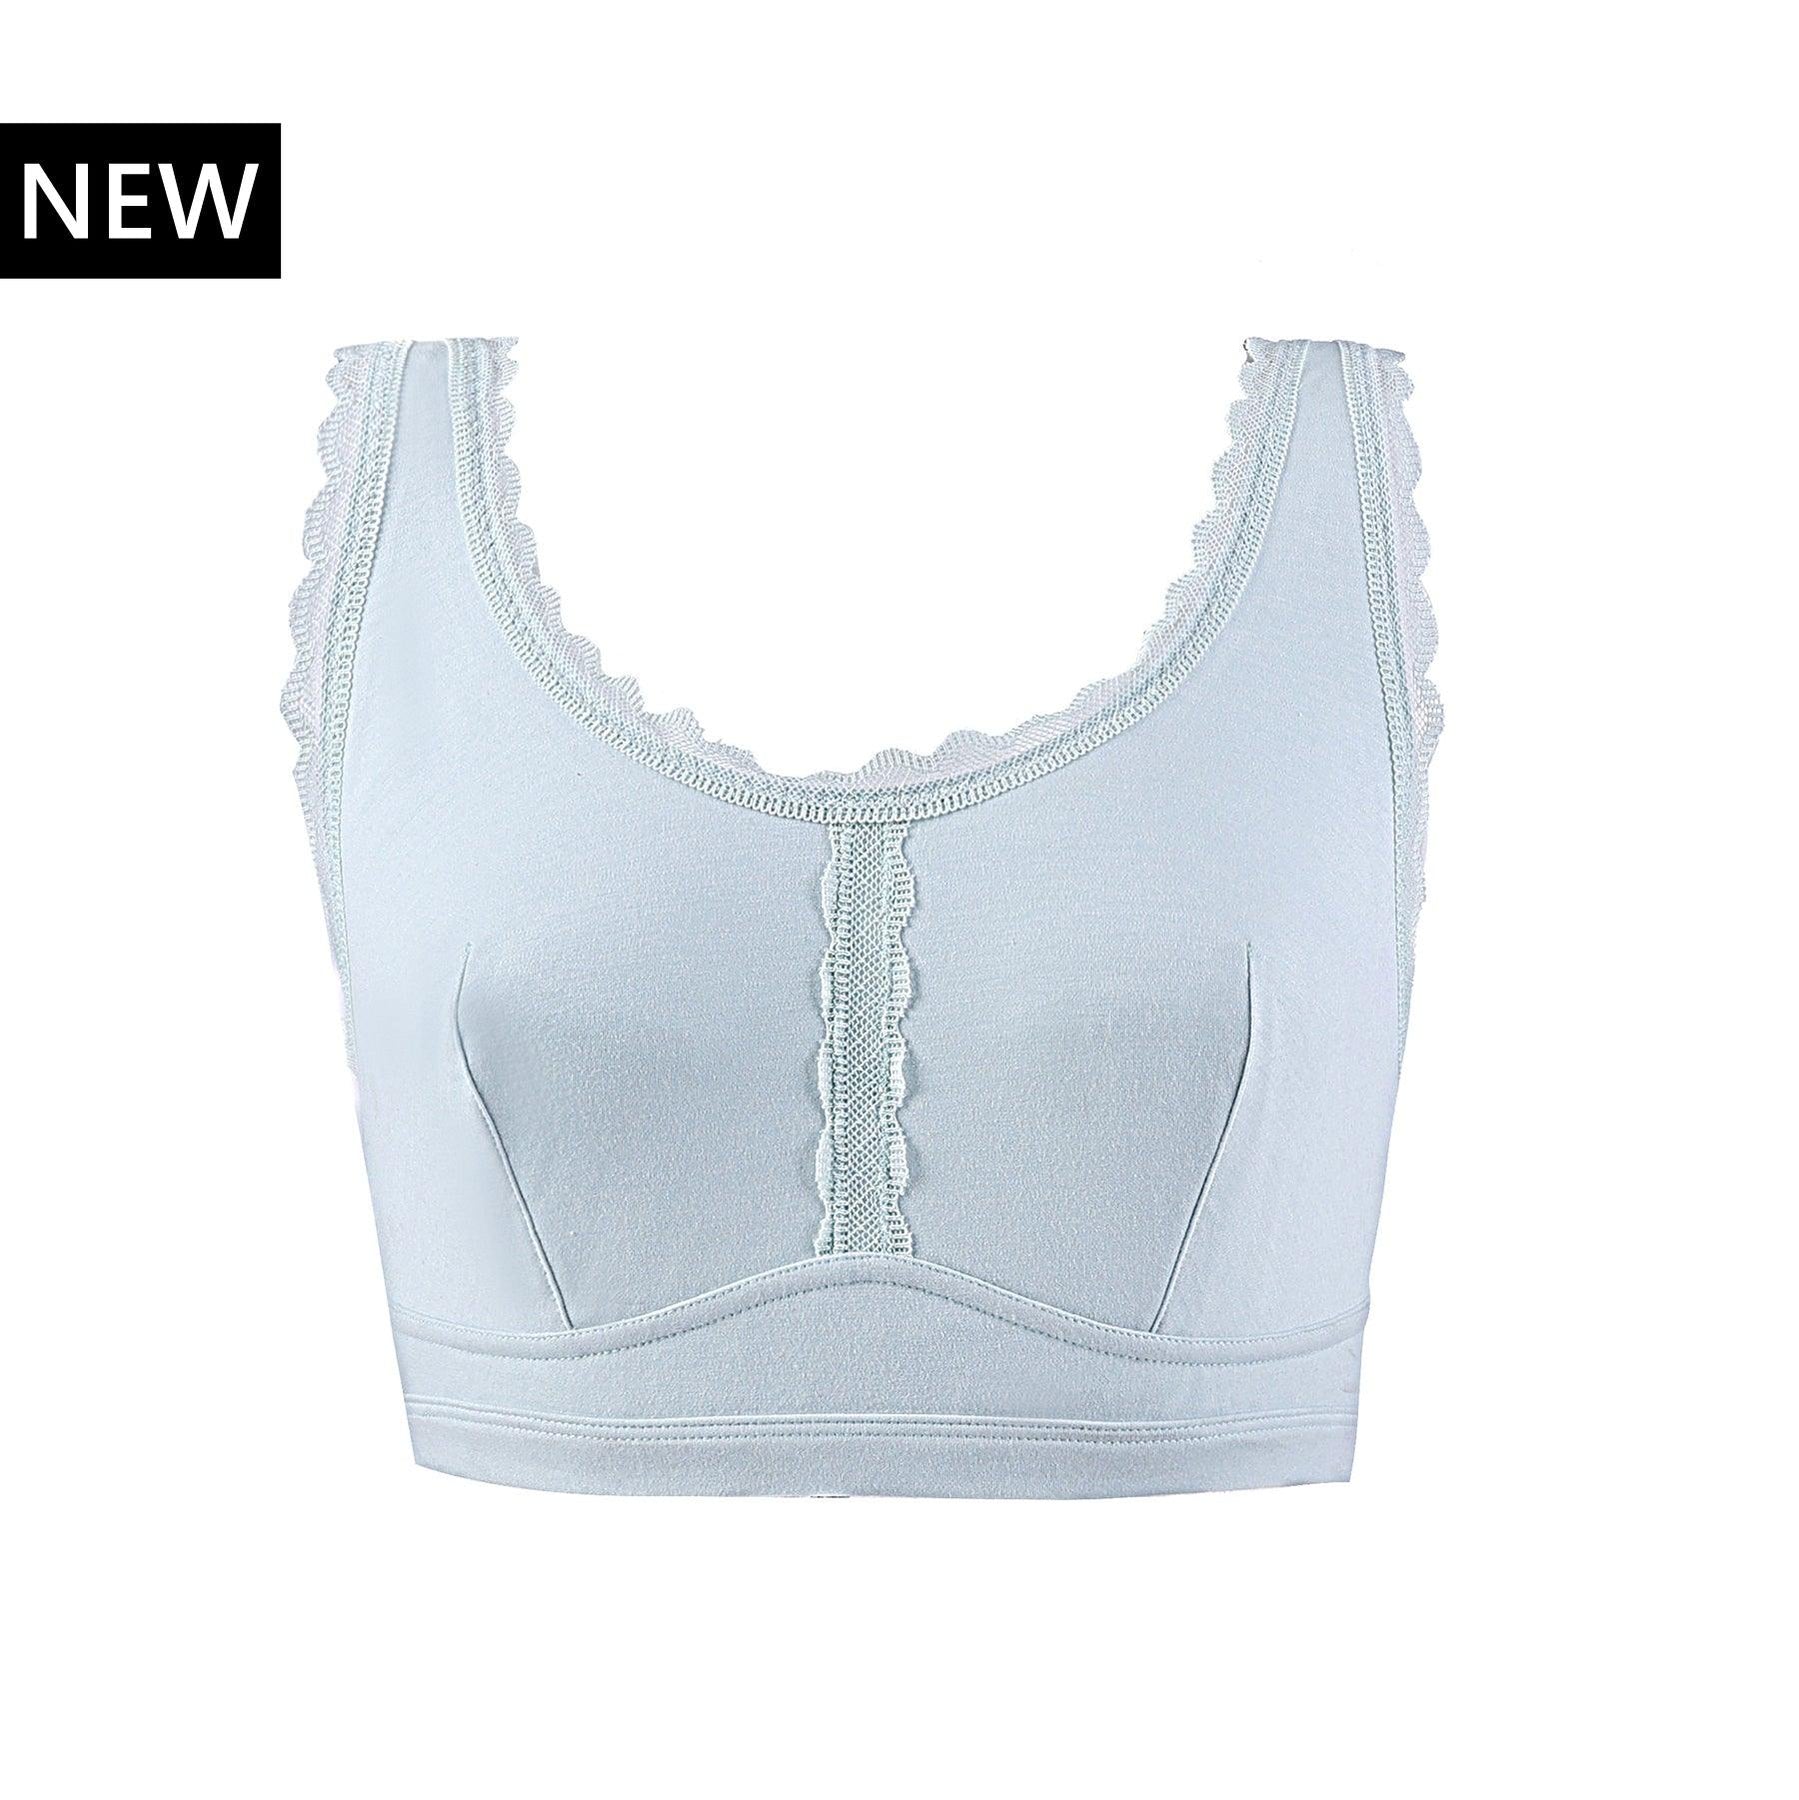 Super Holder WIDE STRAPS BRA, Made in Europe, Gift for Her -  Norway